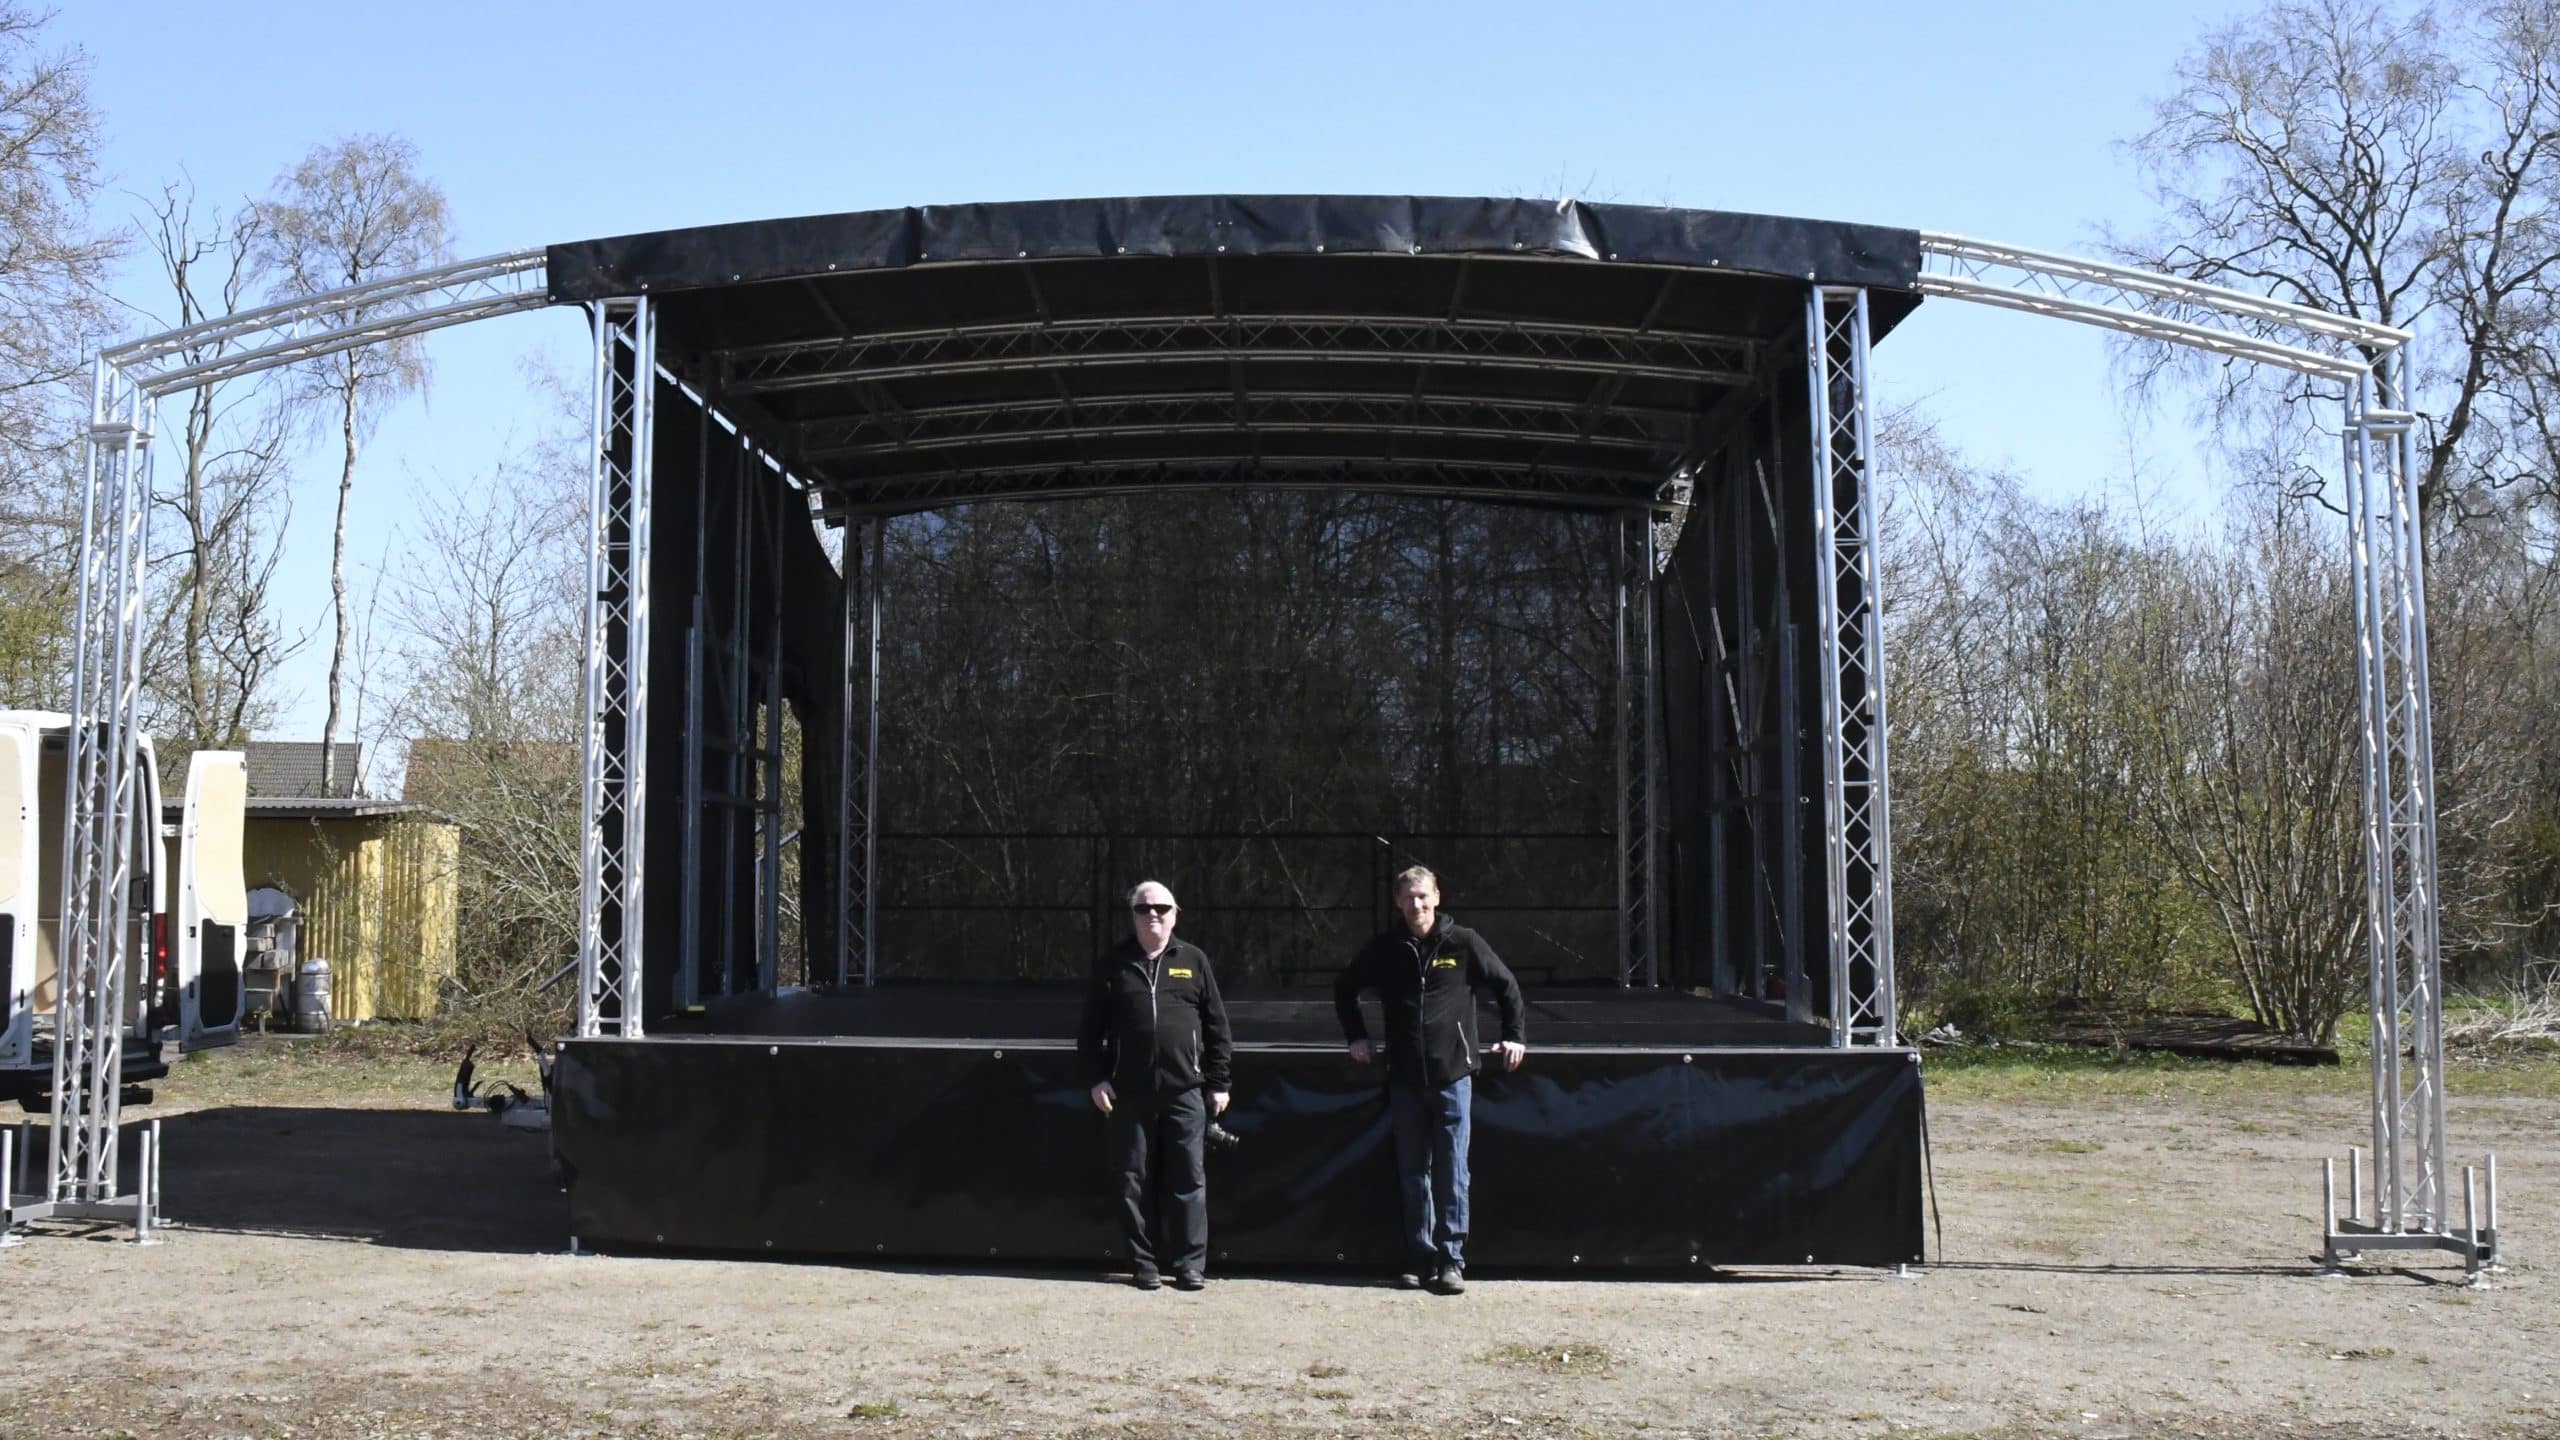 You can build stages in all sizes and heights with our stage platforms. It&apos;s a bit like Lego blocks.